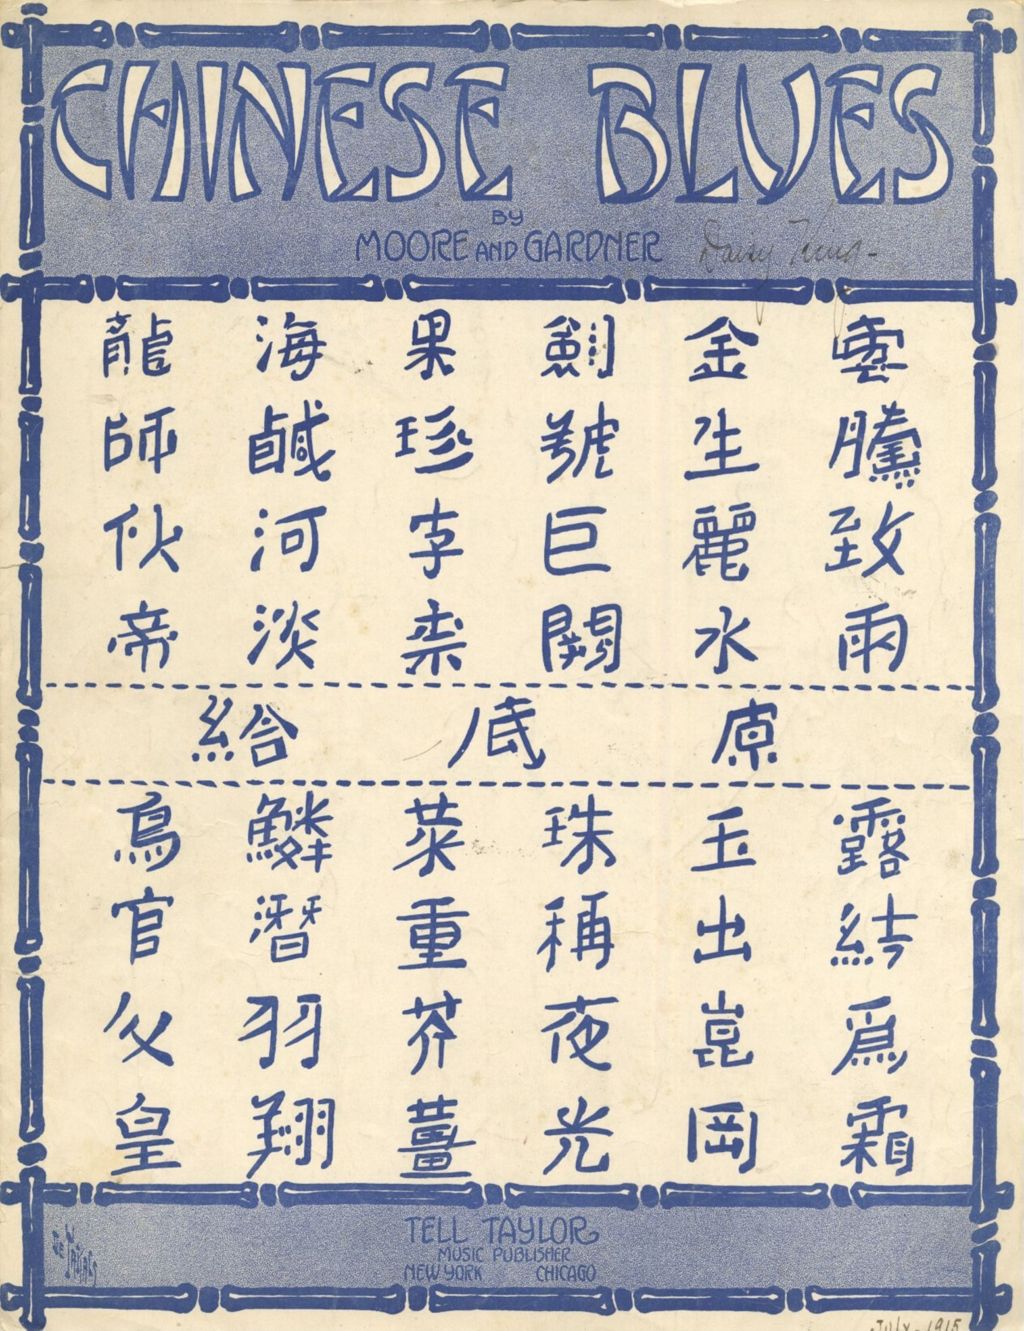 Miniature of Chinese Blues